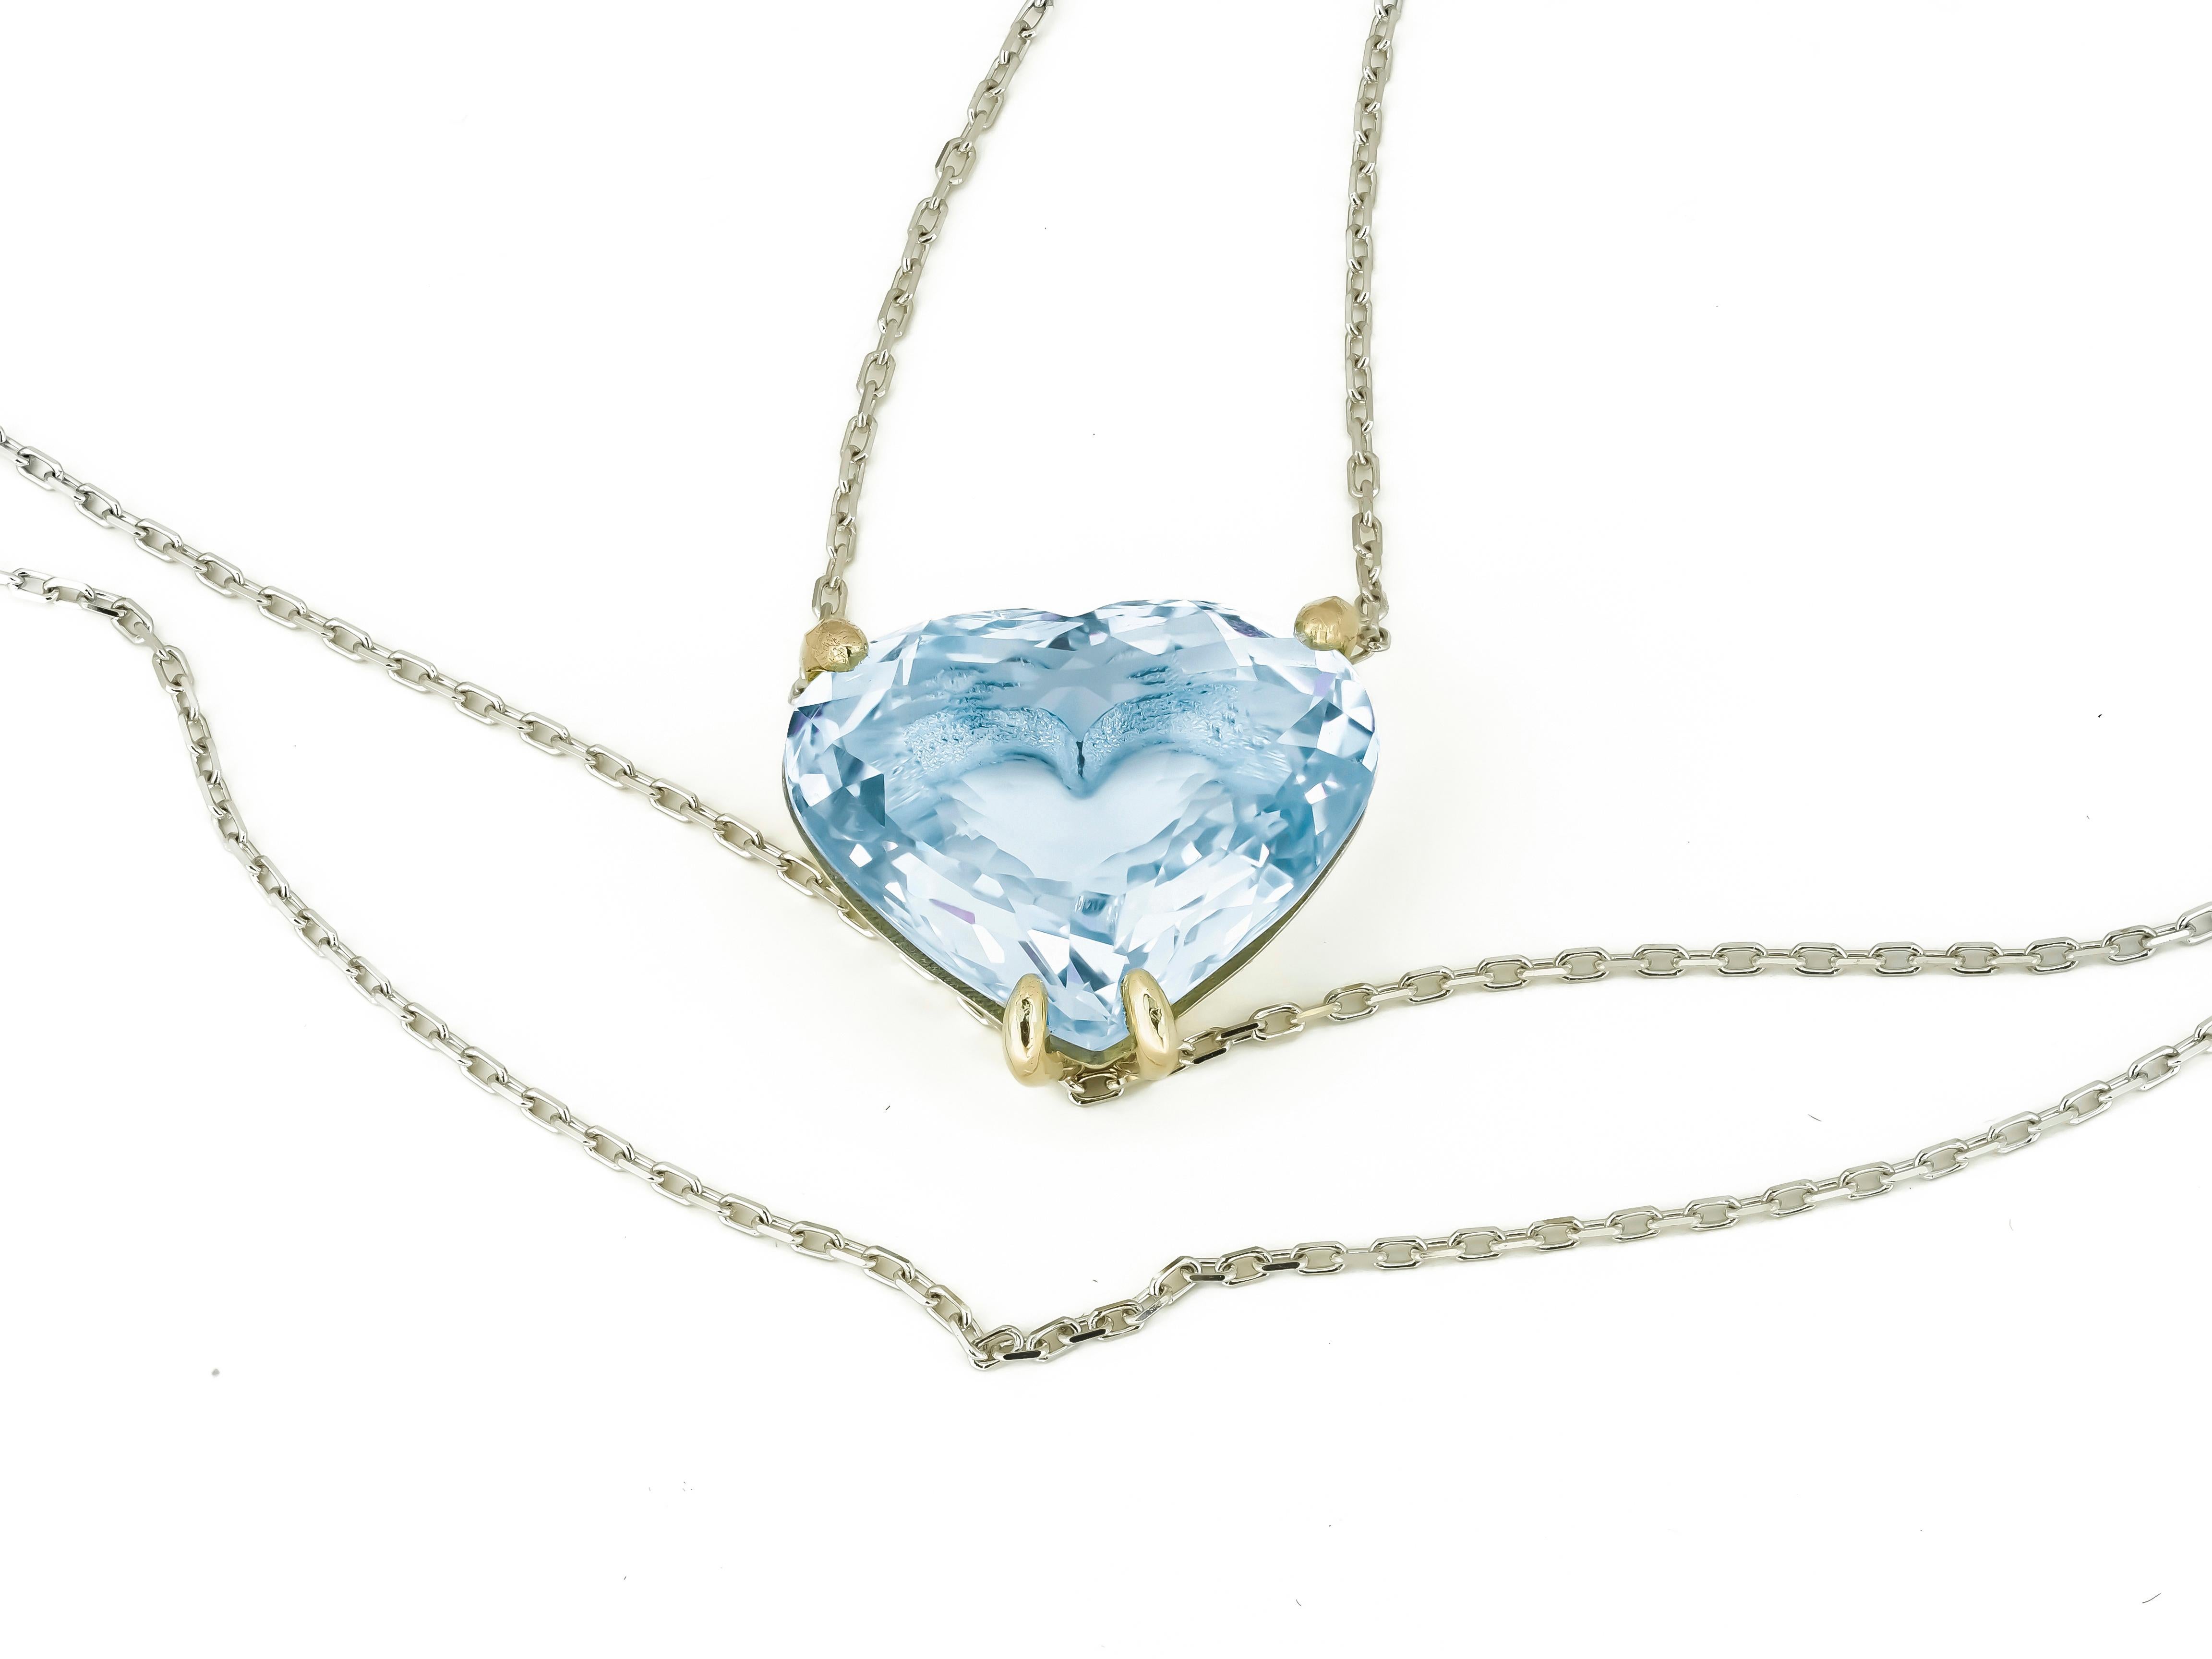 Heart Cut Heart shaped topaz pendant necklace in 14k gold.  For Sale